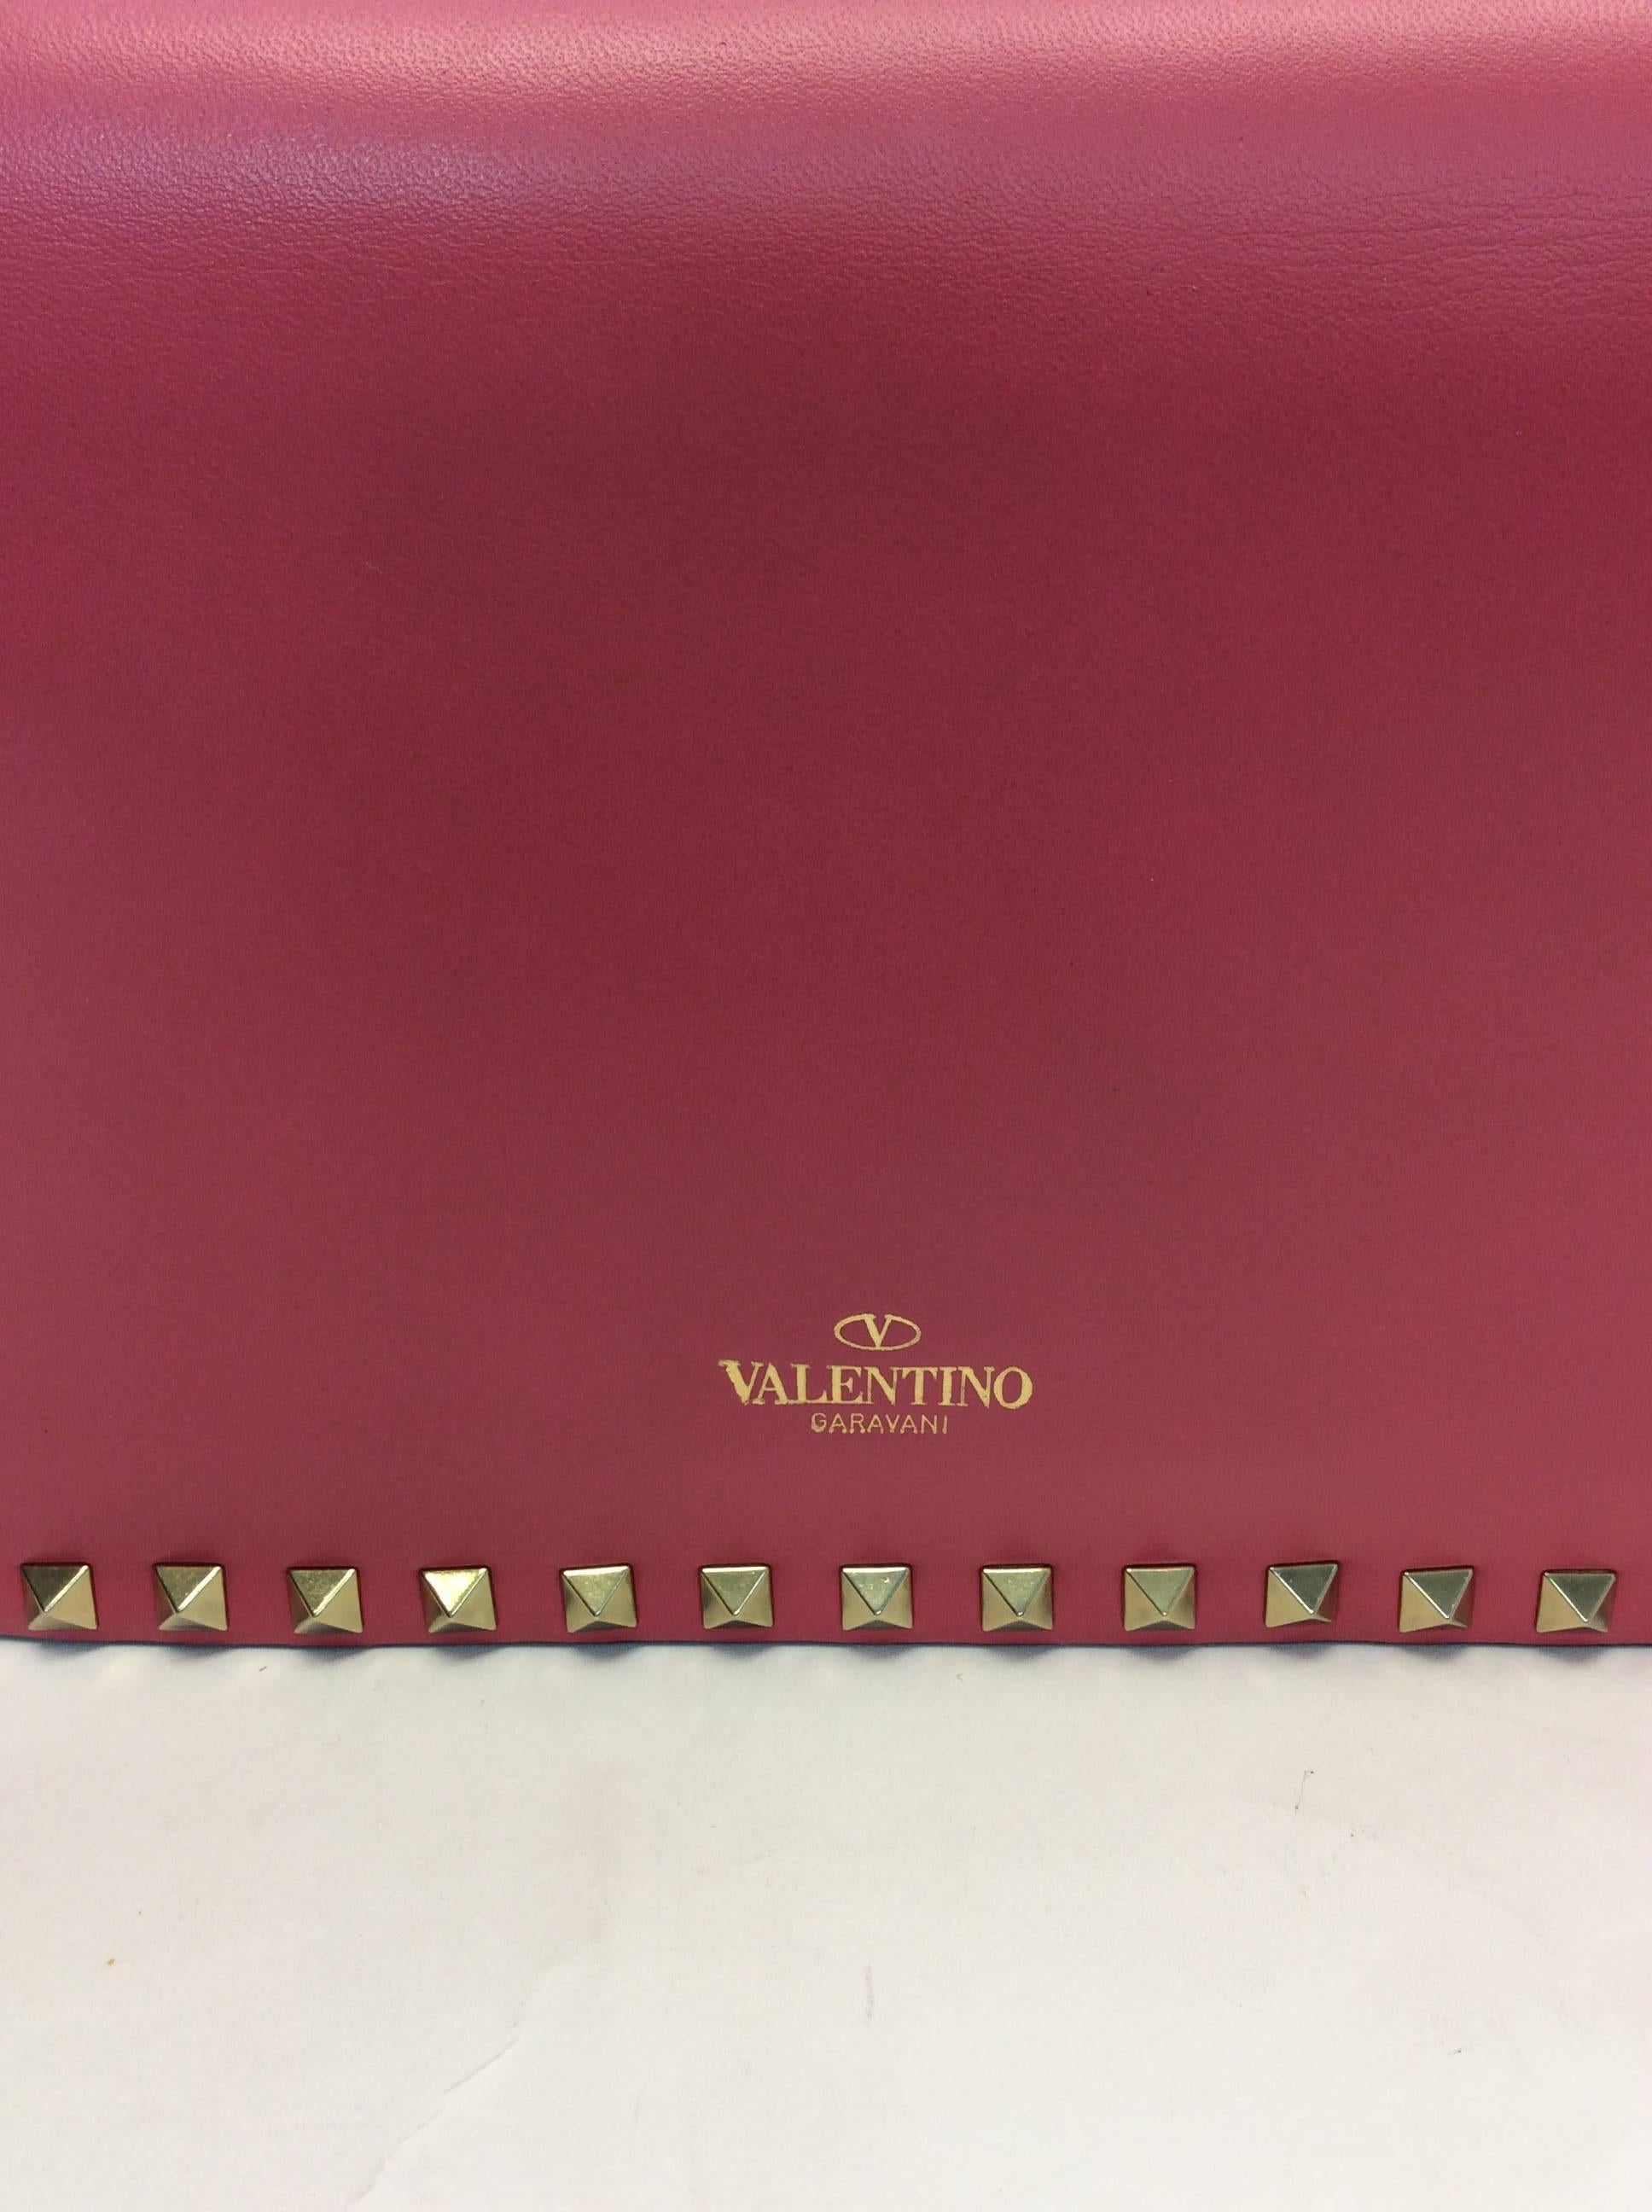 Valentino NWT Tricolor Rockstod Flap Clutch
Front flap closure
Wrist strap on back and side
Pink, green and purple 
Valentino stamp on front exterior
$1672